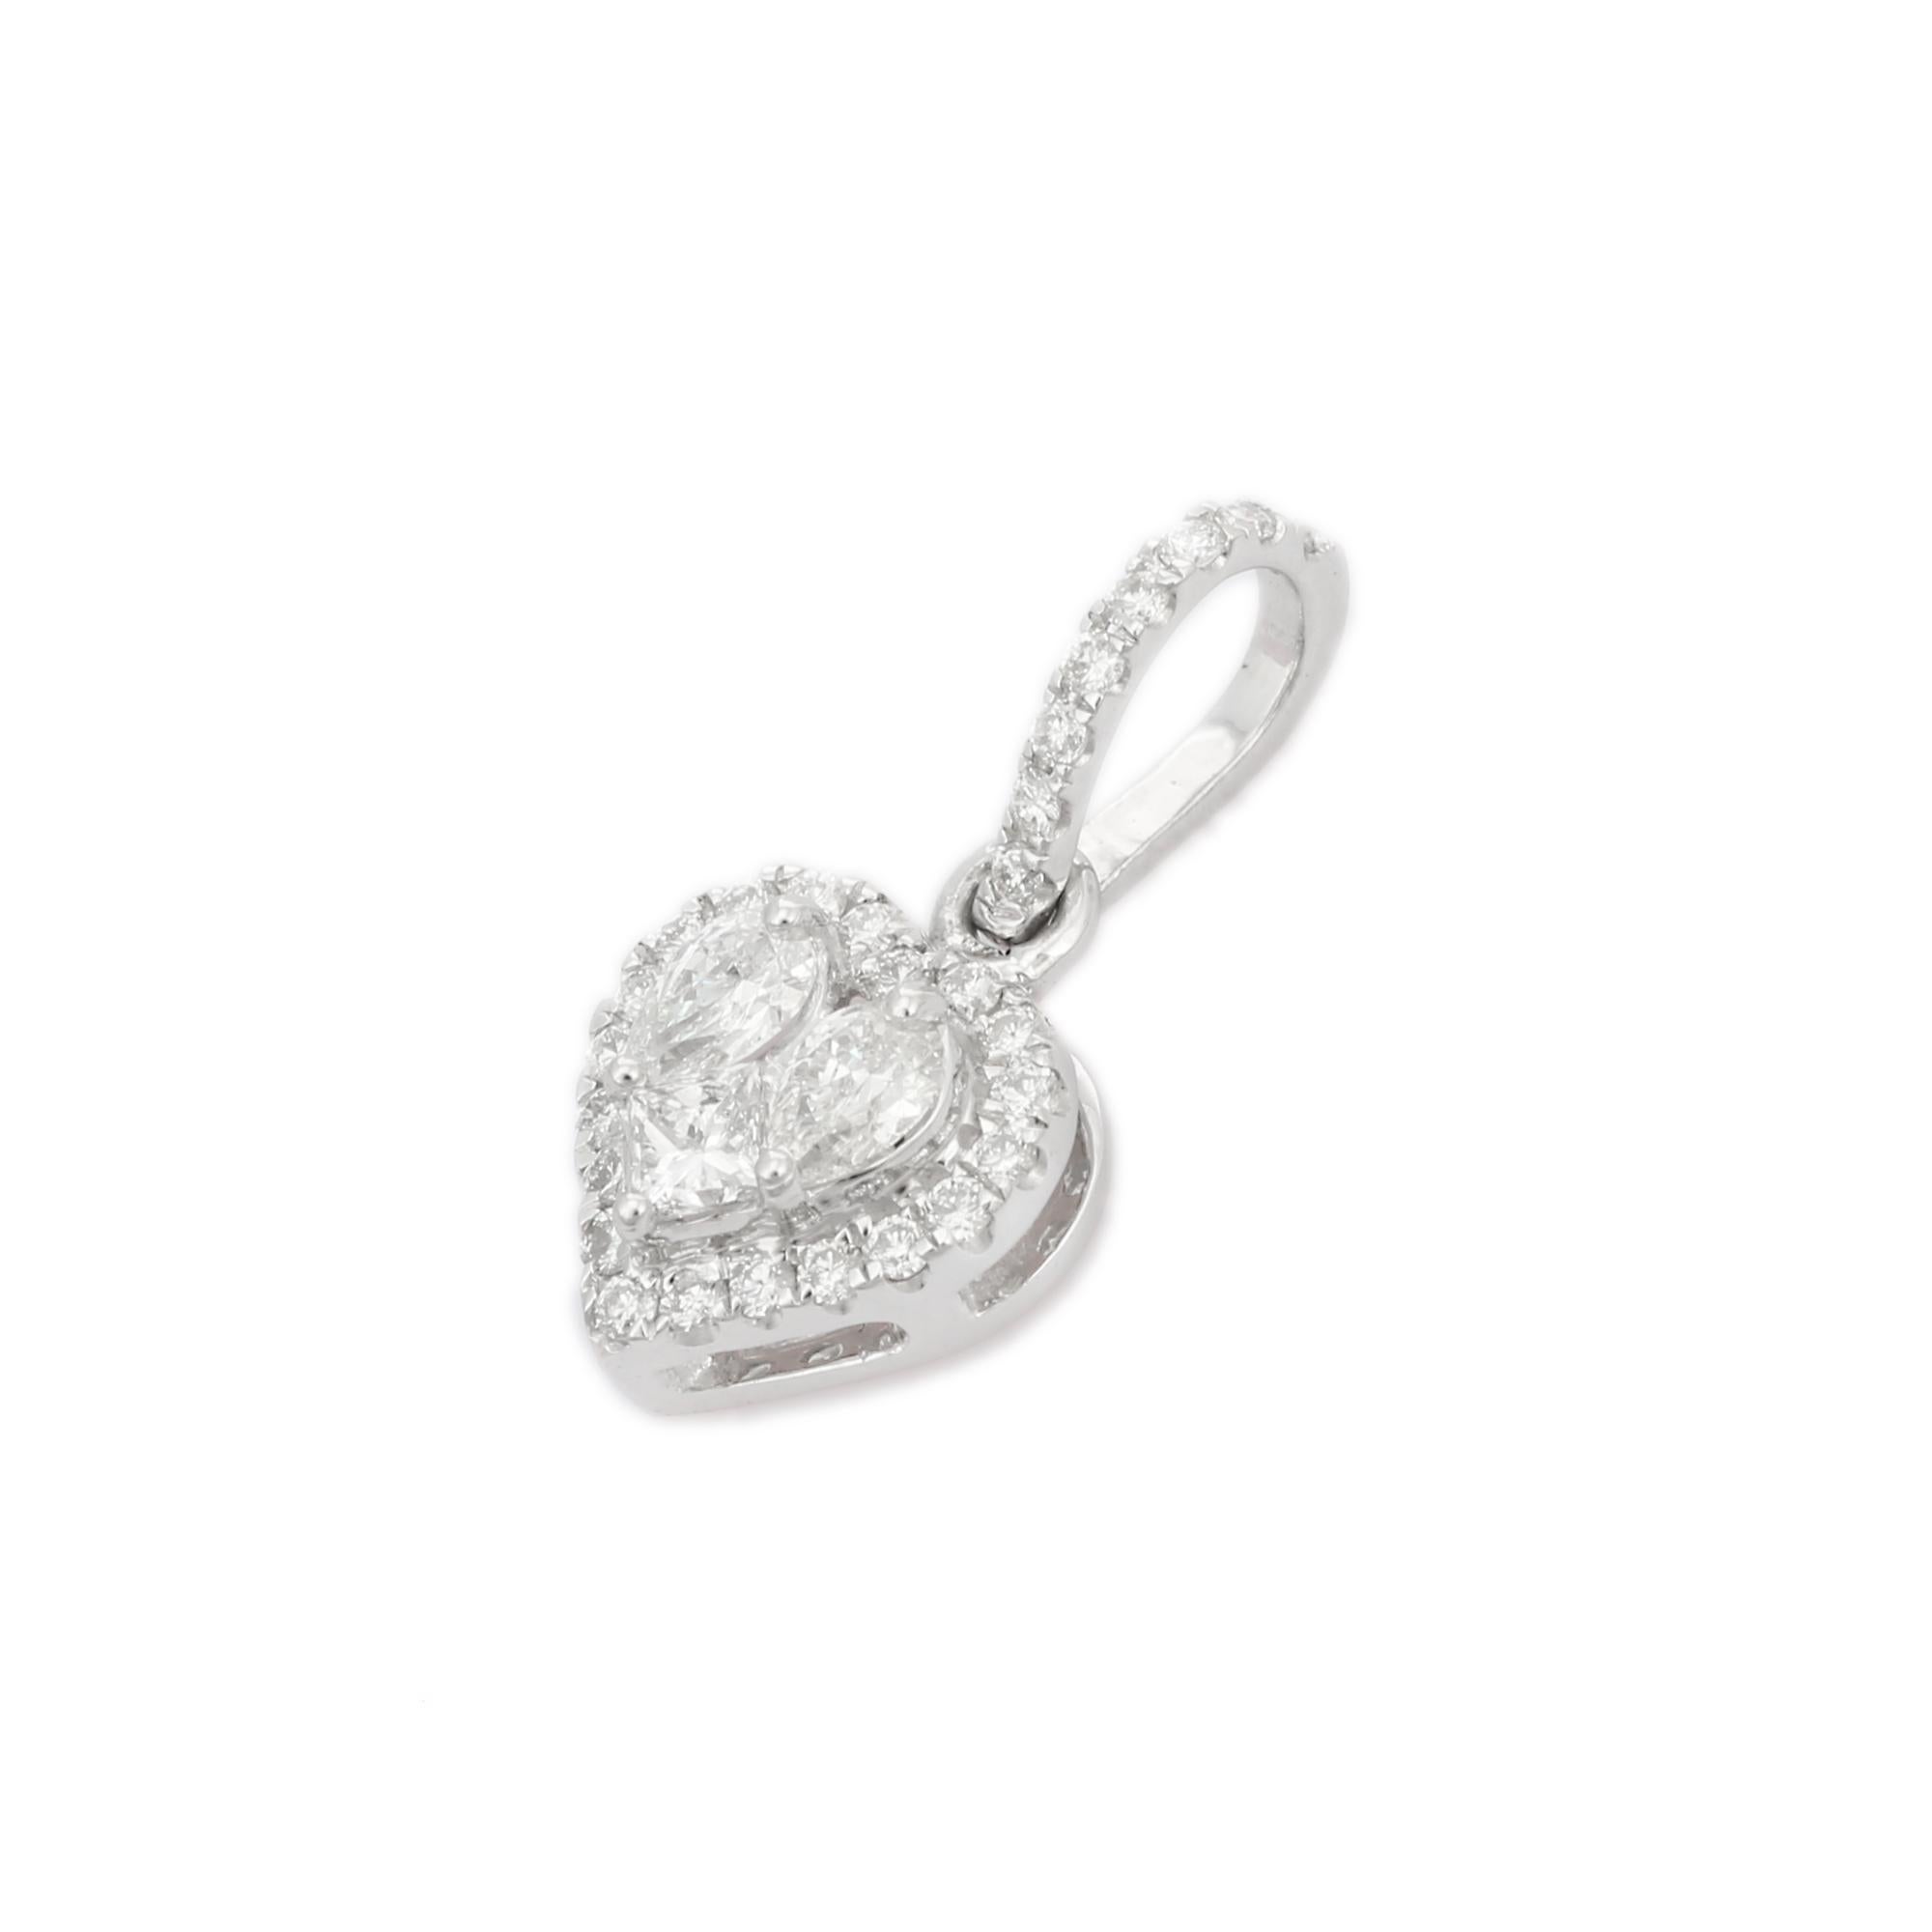 Dainty Diamond Heart Pendant in 14K Gold with diamond studded in gold. This stunning piece of jewelry instantly elevates a casual look or dressy outfit. 
April birthstone diamond brings love, fame, success and prosperity.
Designed with mixed cut